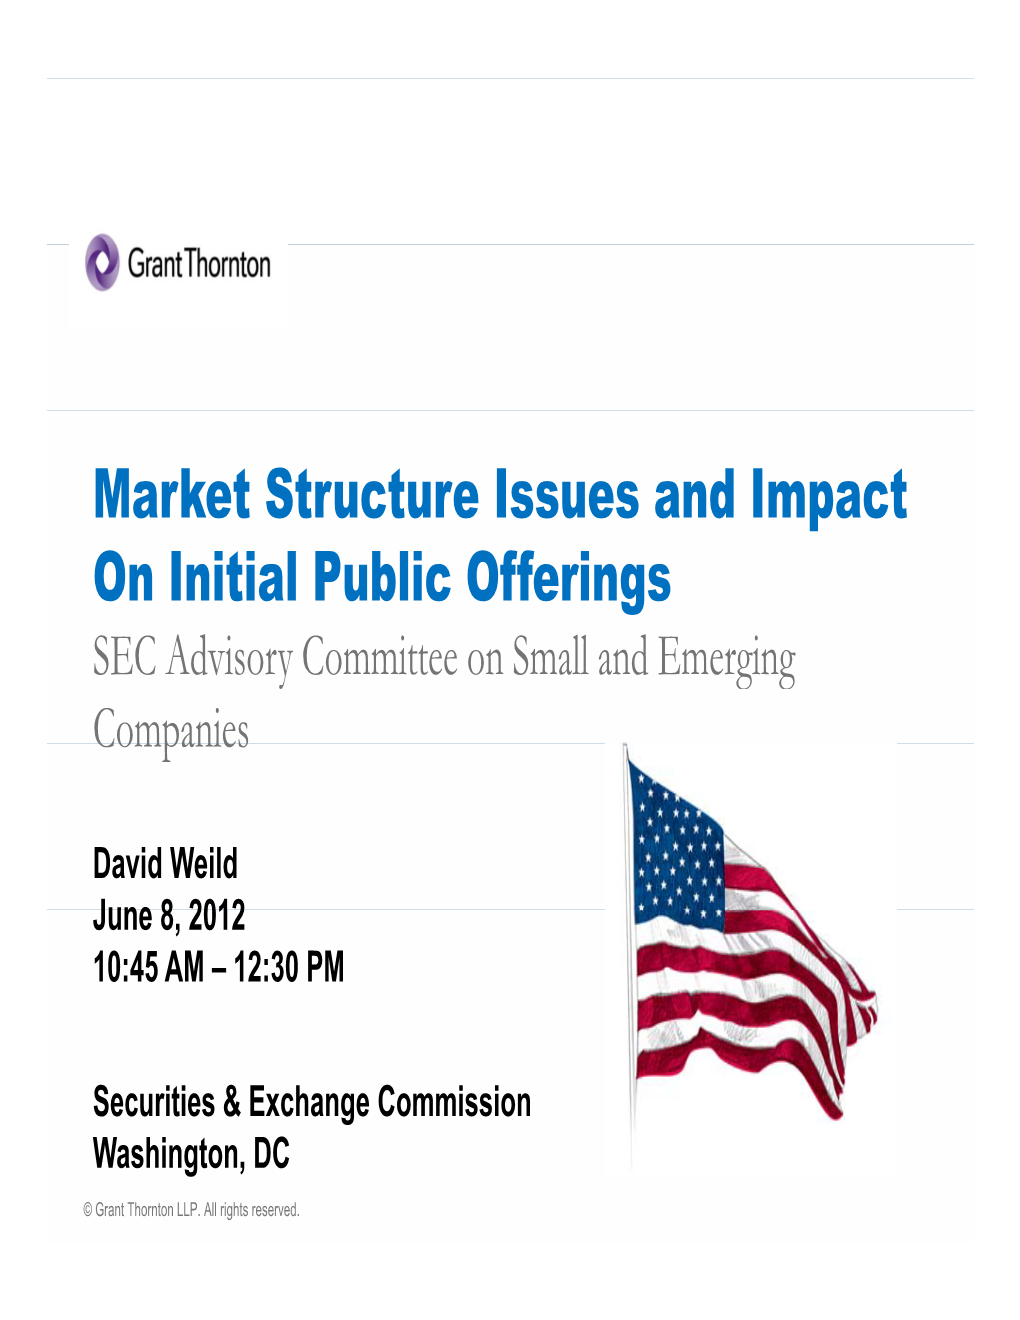 Market Structure Issues and Impact on Initial Public Offerings SEC Advisory Committee on Small and Emerging Companies